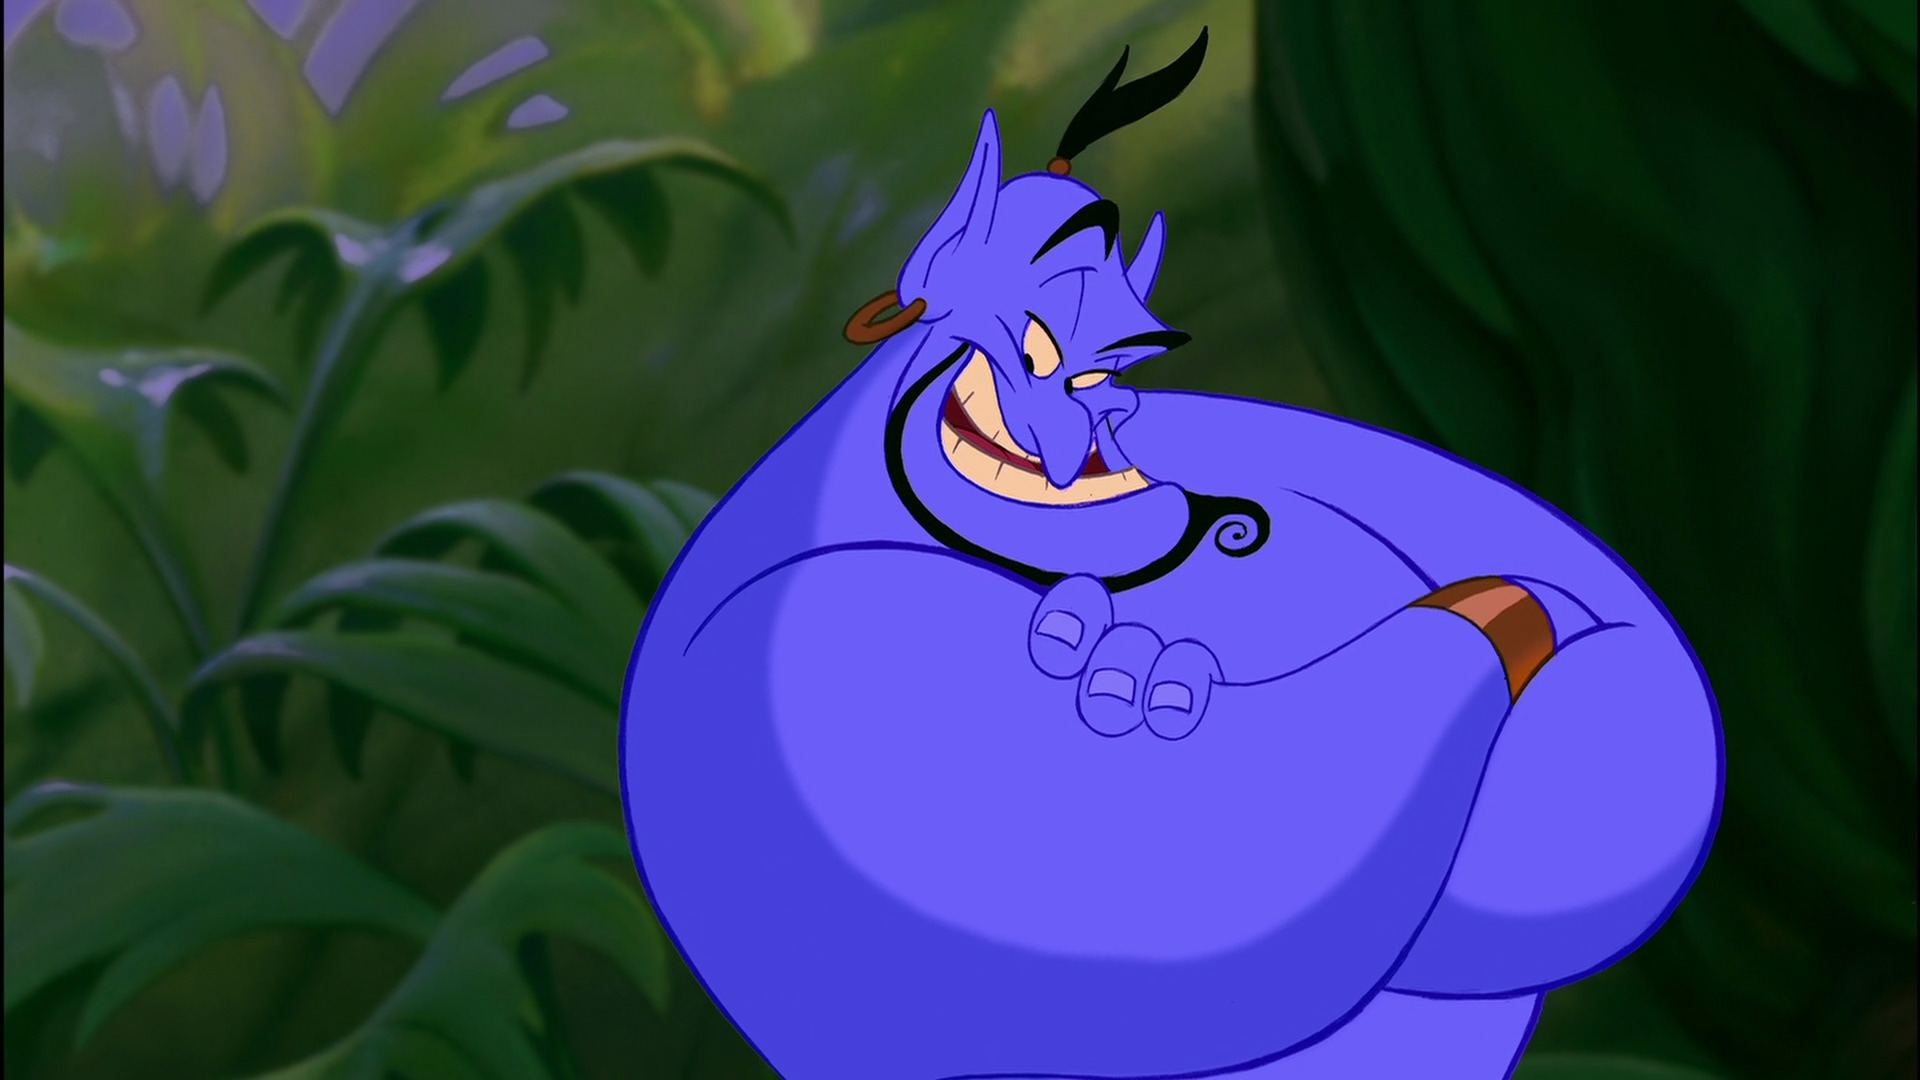 Disney Taps Guy Ritchie To Direct Live Action “Aladdin” Movie